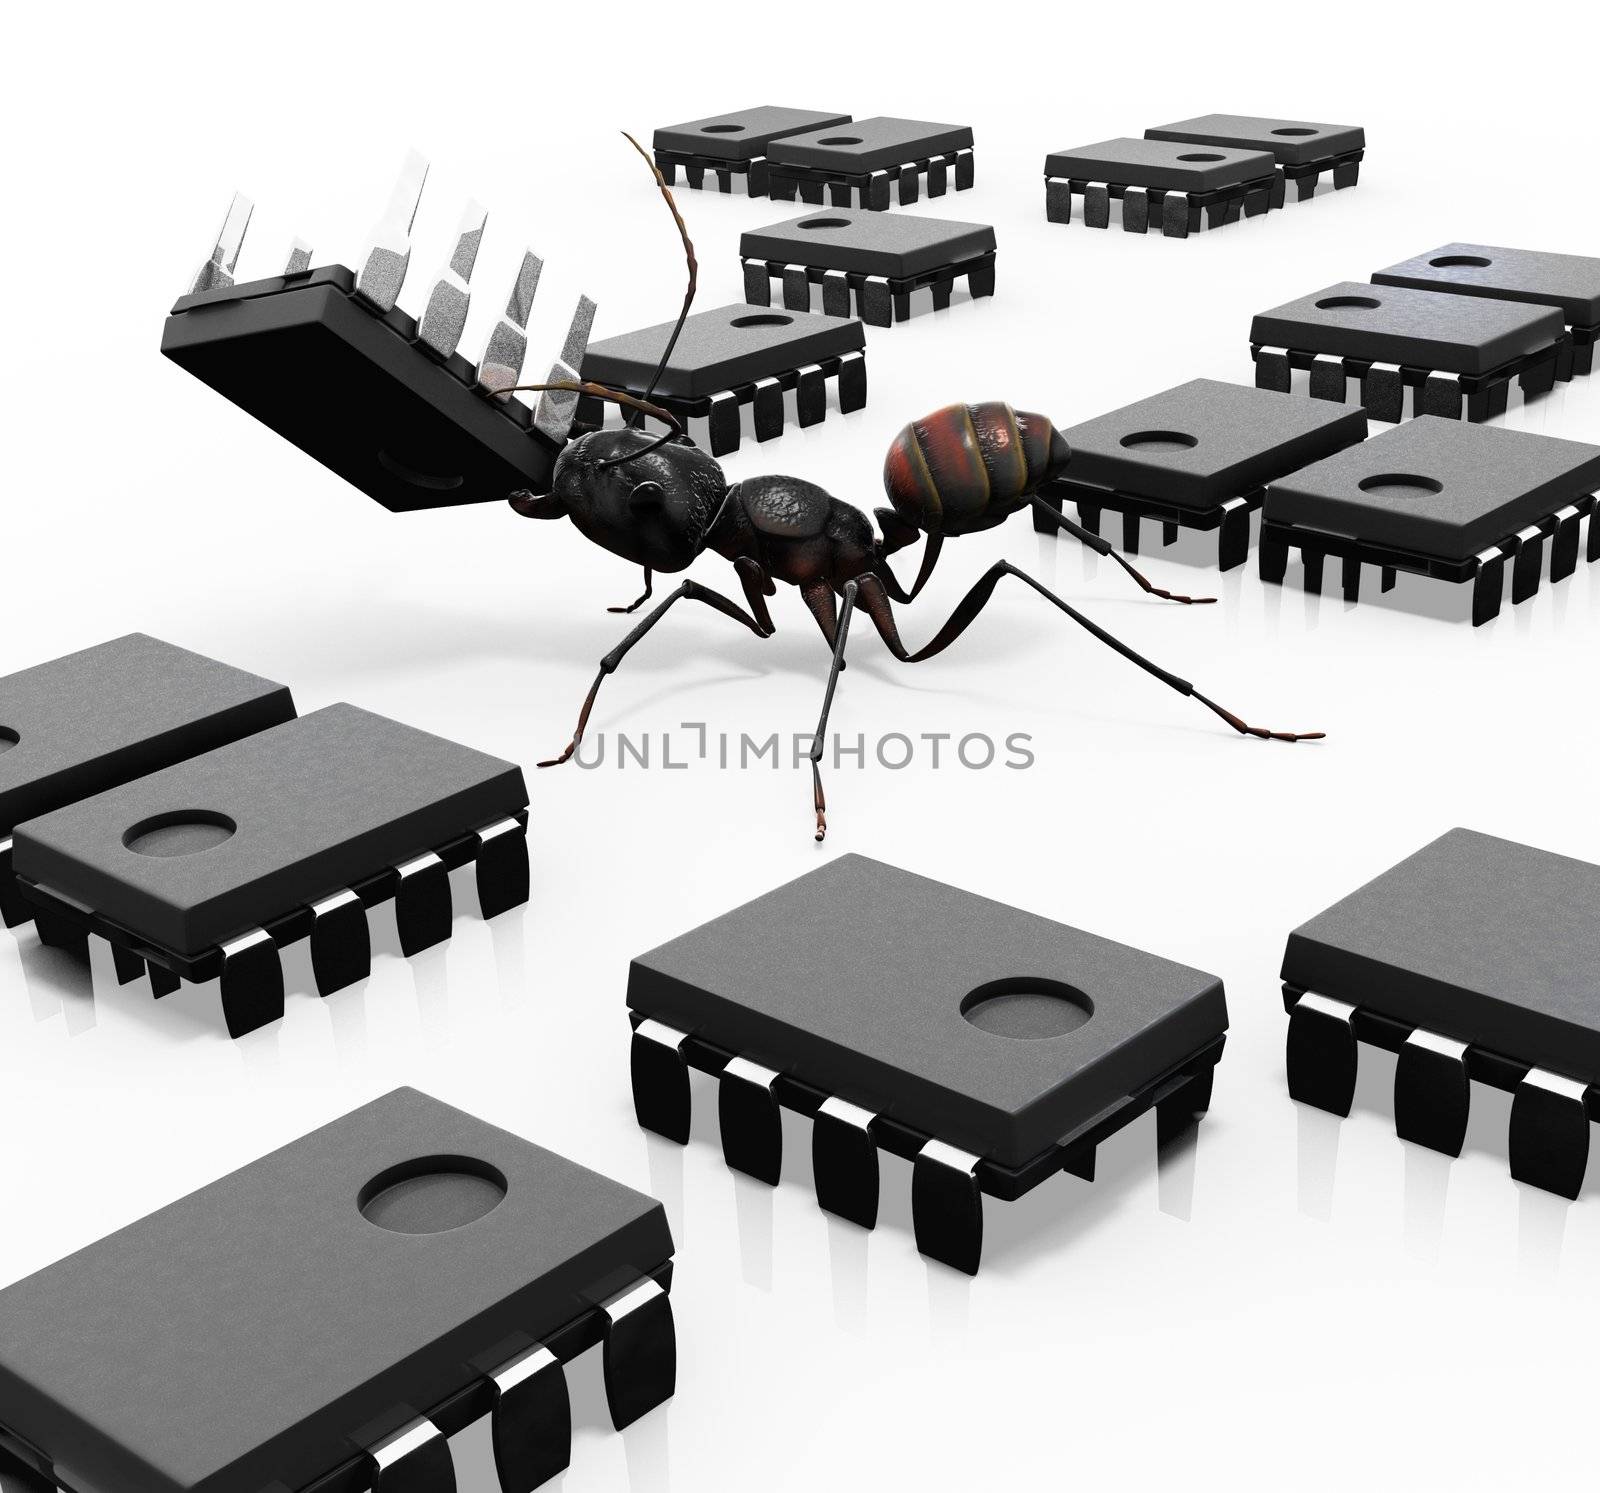 An ant carefully organizing microchips one by one. He is a bug, which makes an interesting spin on the old "computer bug" concept. 